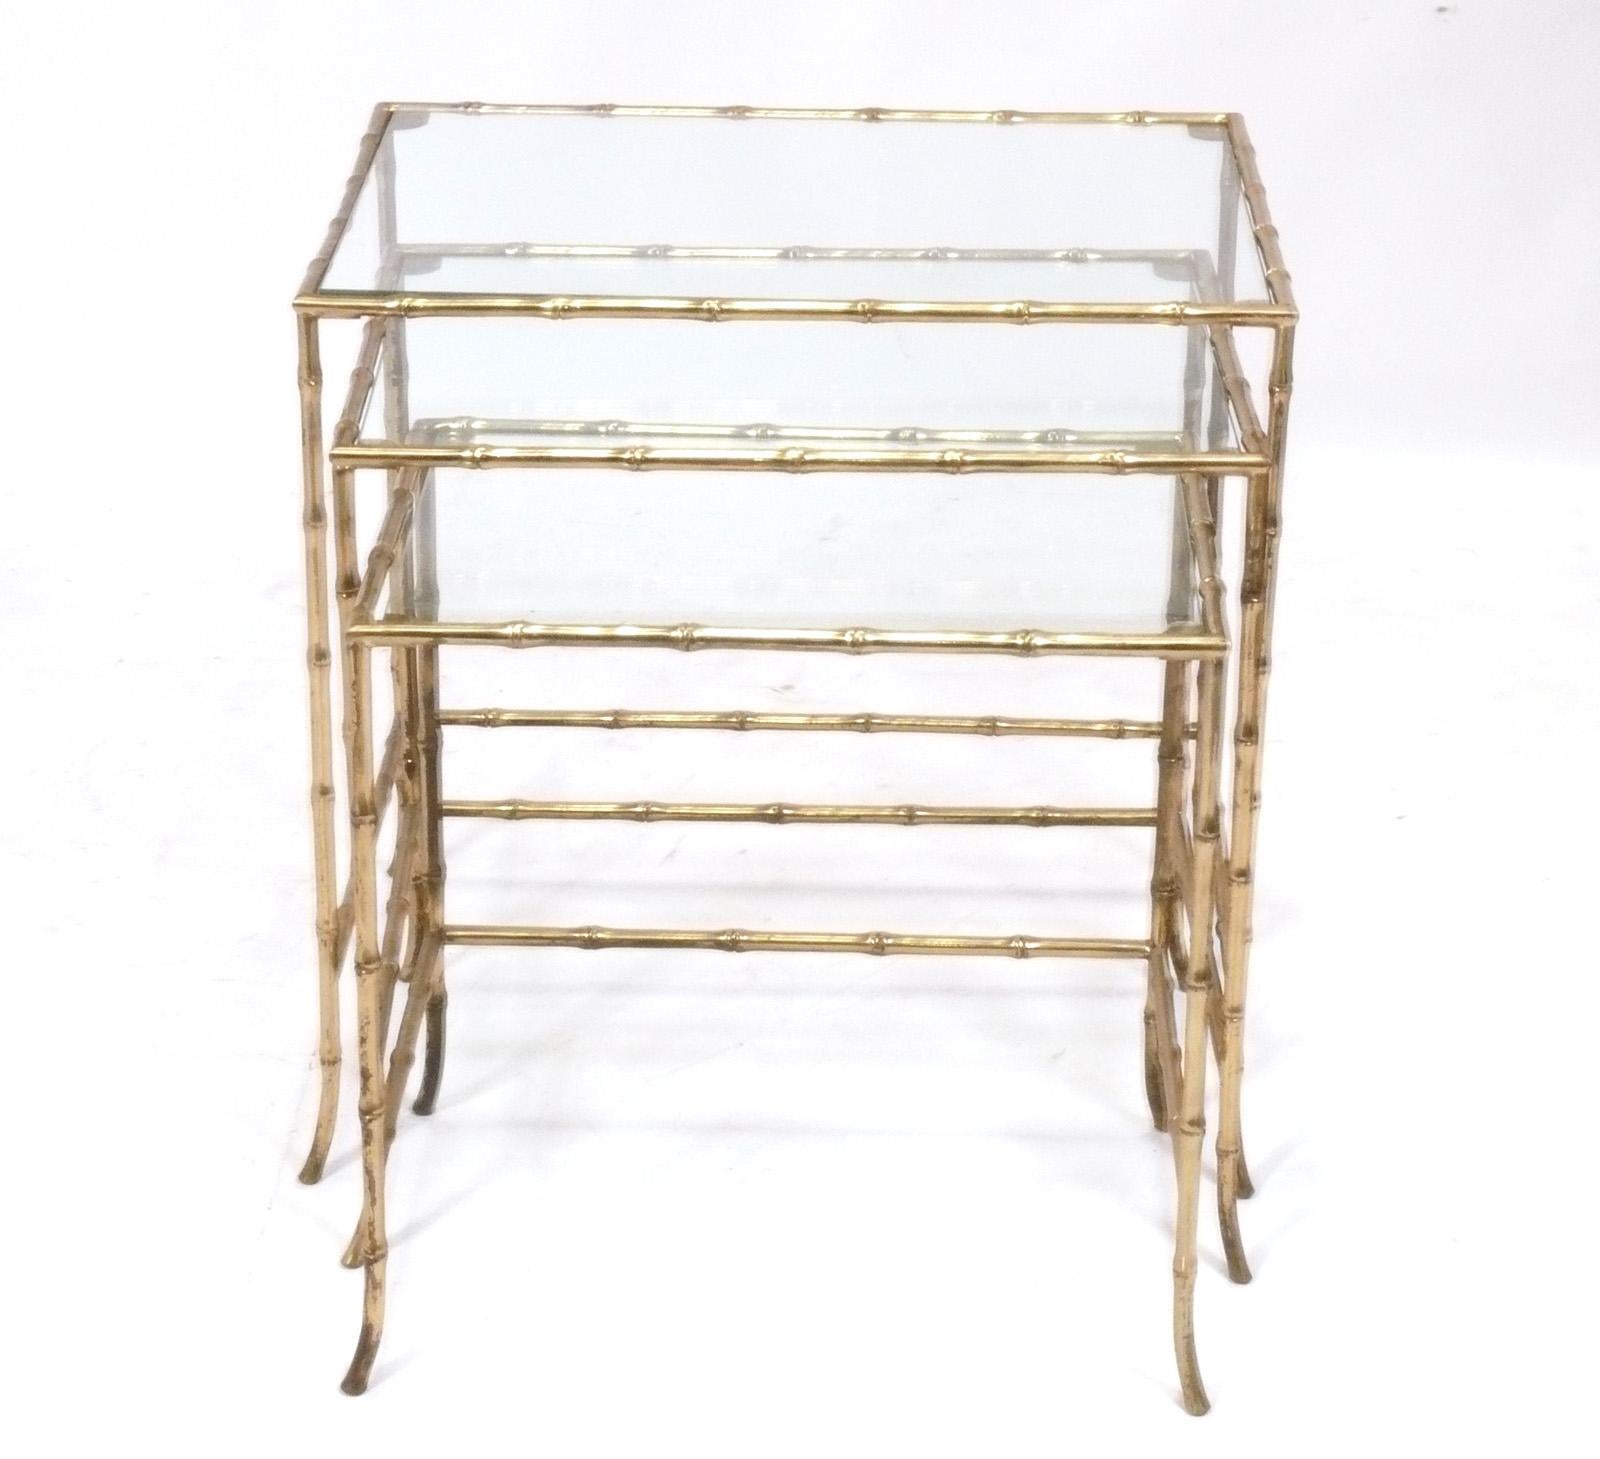 Elegant Set of Three Brass Faux Bamboo Nesting Tables, attributed to Maison Bagues, French, circa 1960s. Brass retains warm original patina. They are a versatile size and can be used as end or side tables in a living area, or as nightstands in a